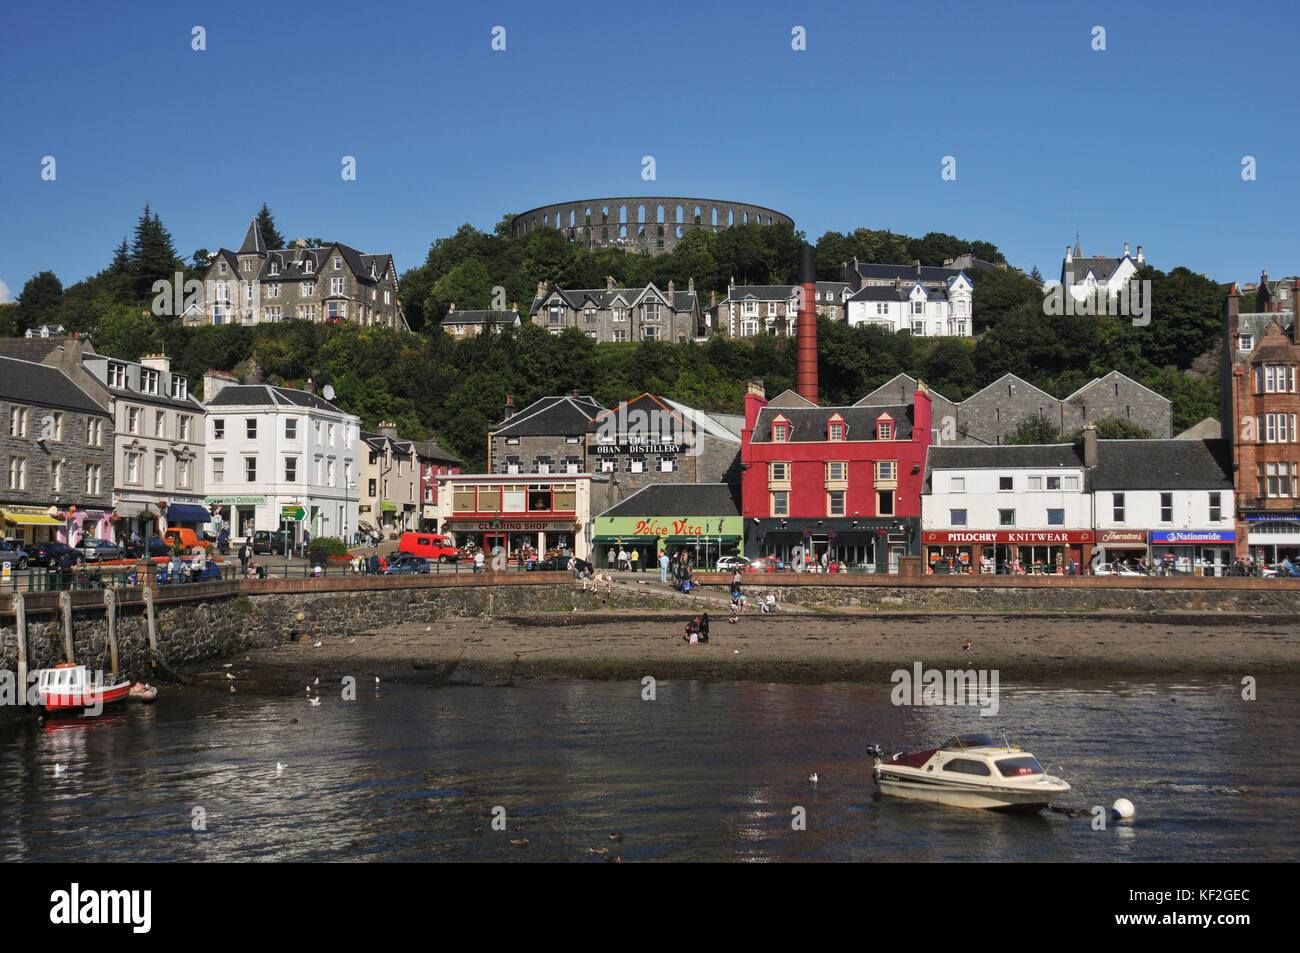 View of the resort town of Oban in Argyll in Scotland's West Highlands across the harbour showing the shops, restaurants, distillery & McCaig's Tower Stock Photo